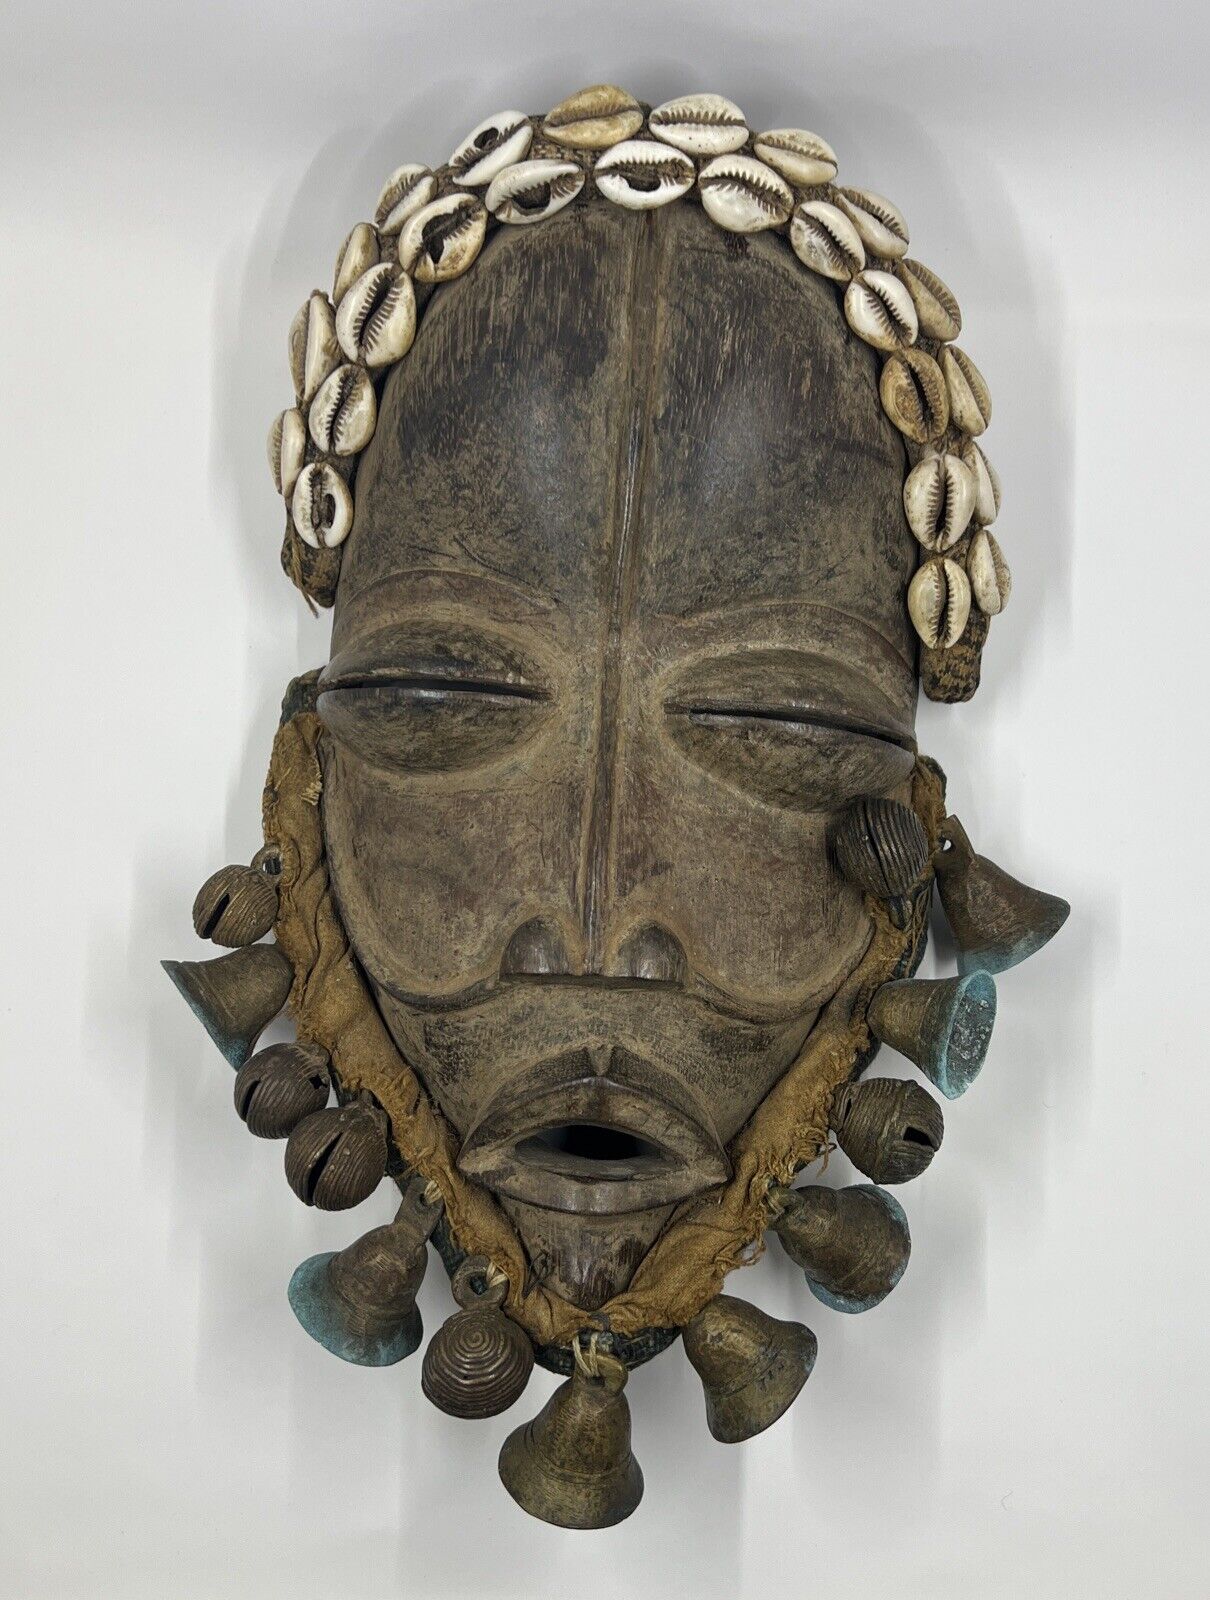 Dan African Tribal Ceremonial Mask With Letter of Guarantee